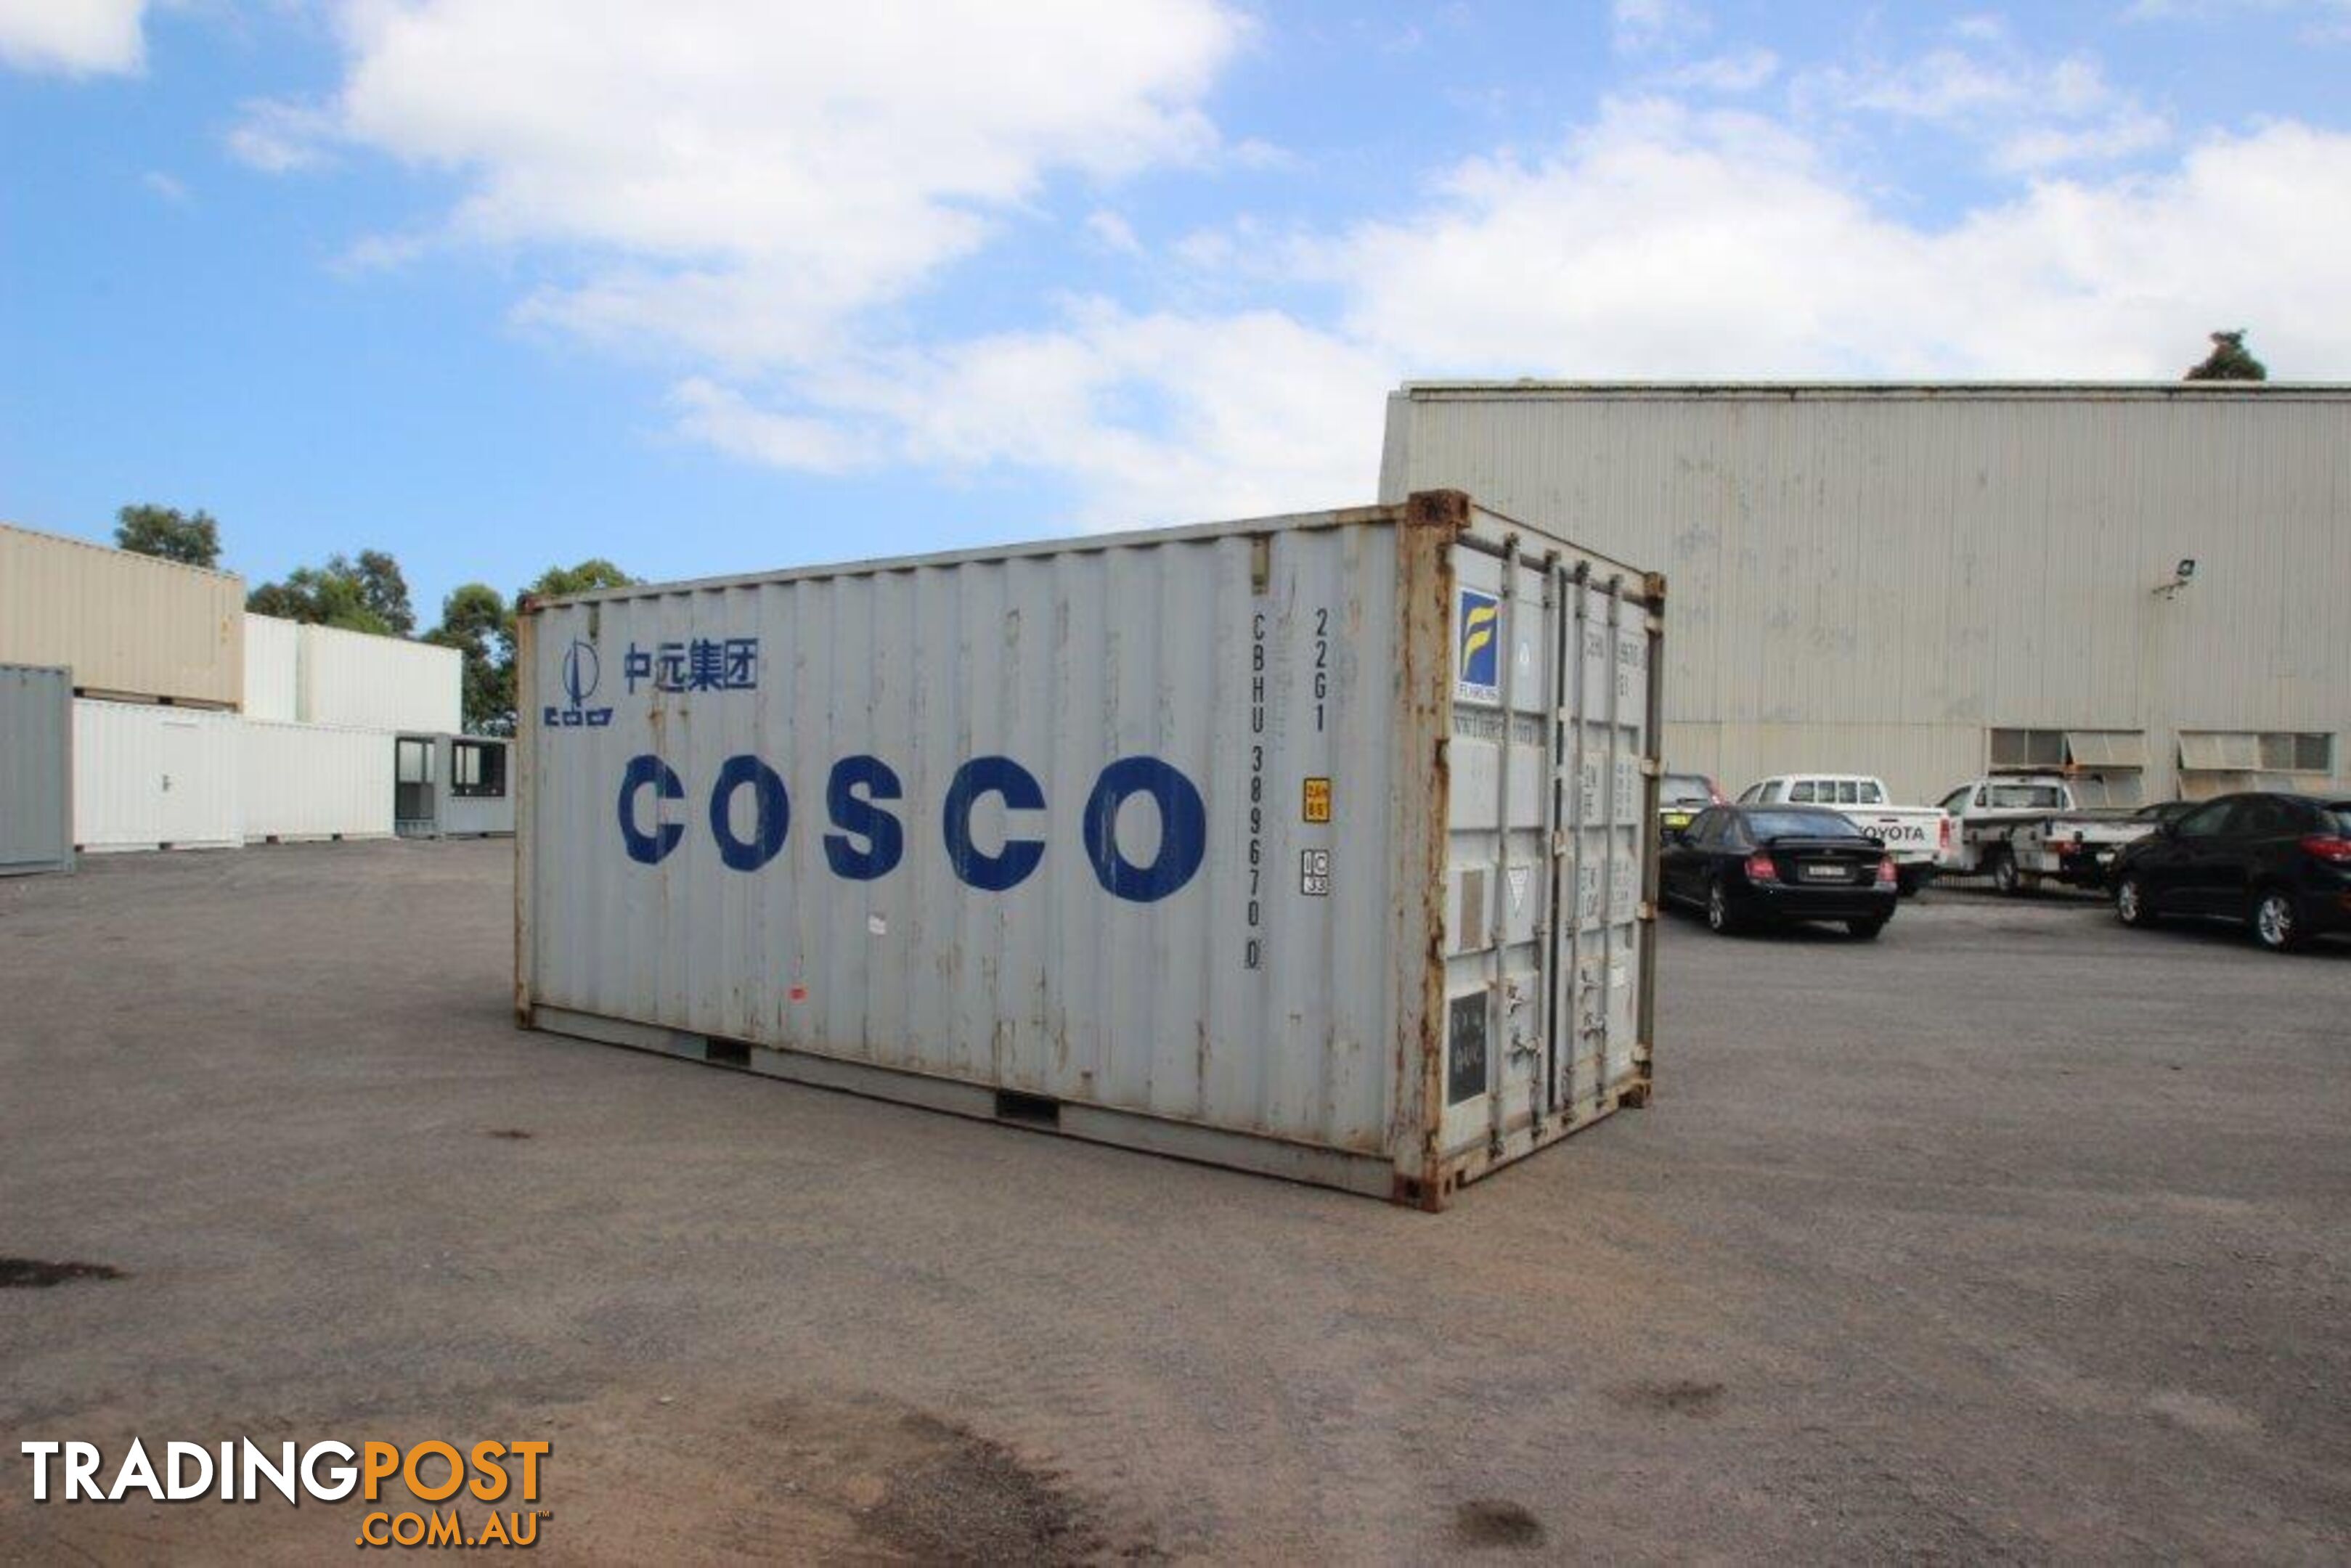 Used 20ft Shipping Containers Singleton - From $3650 + GST